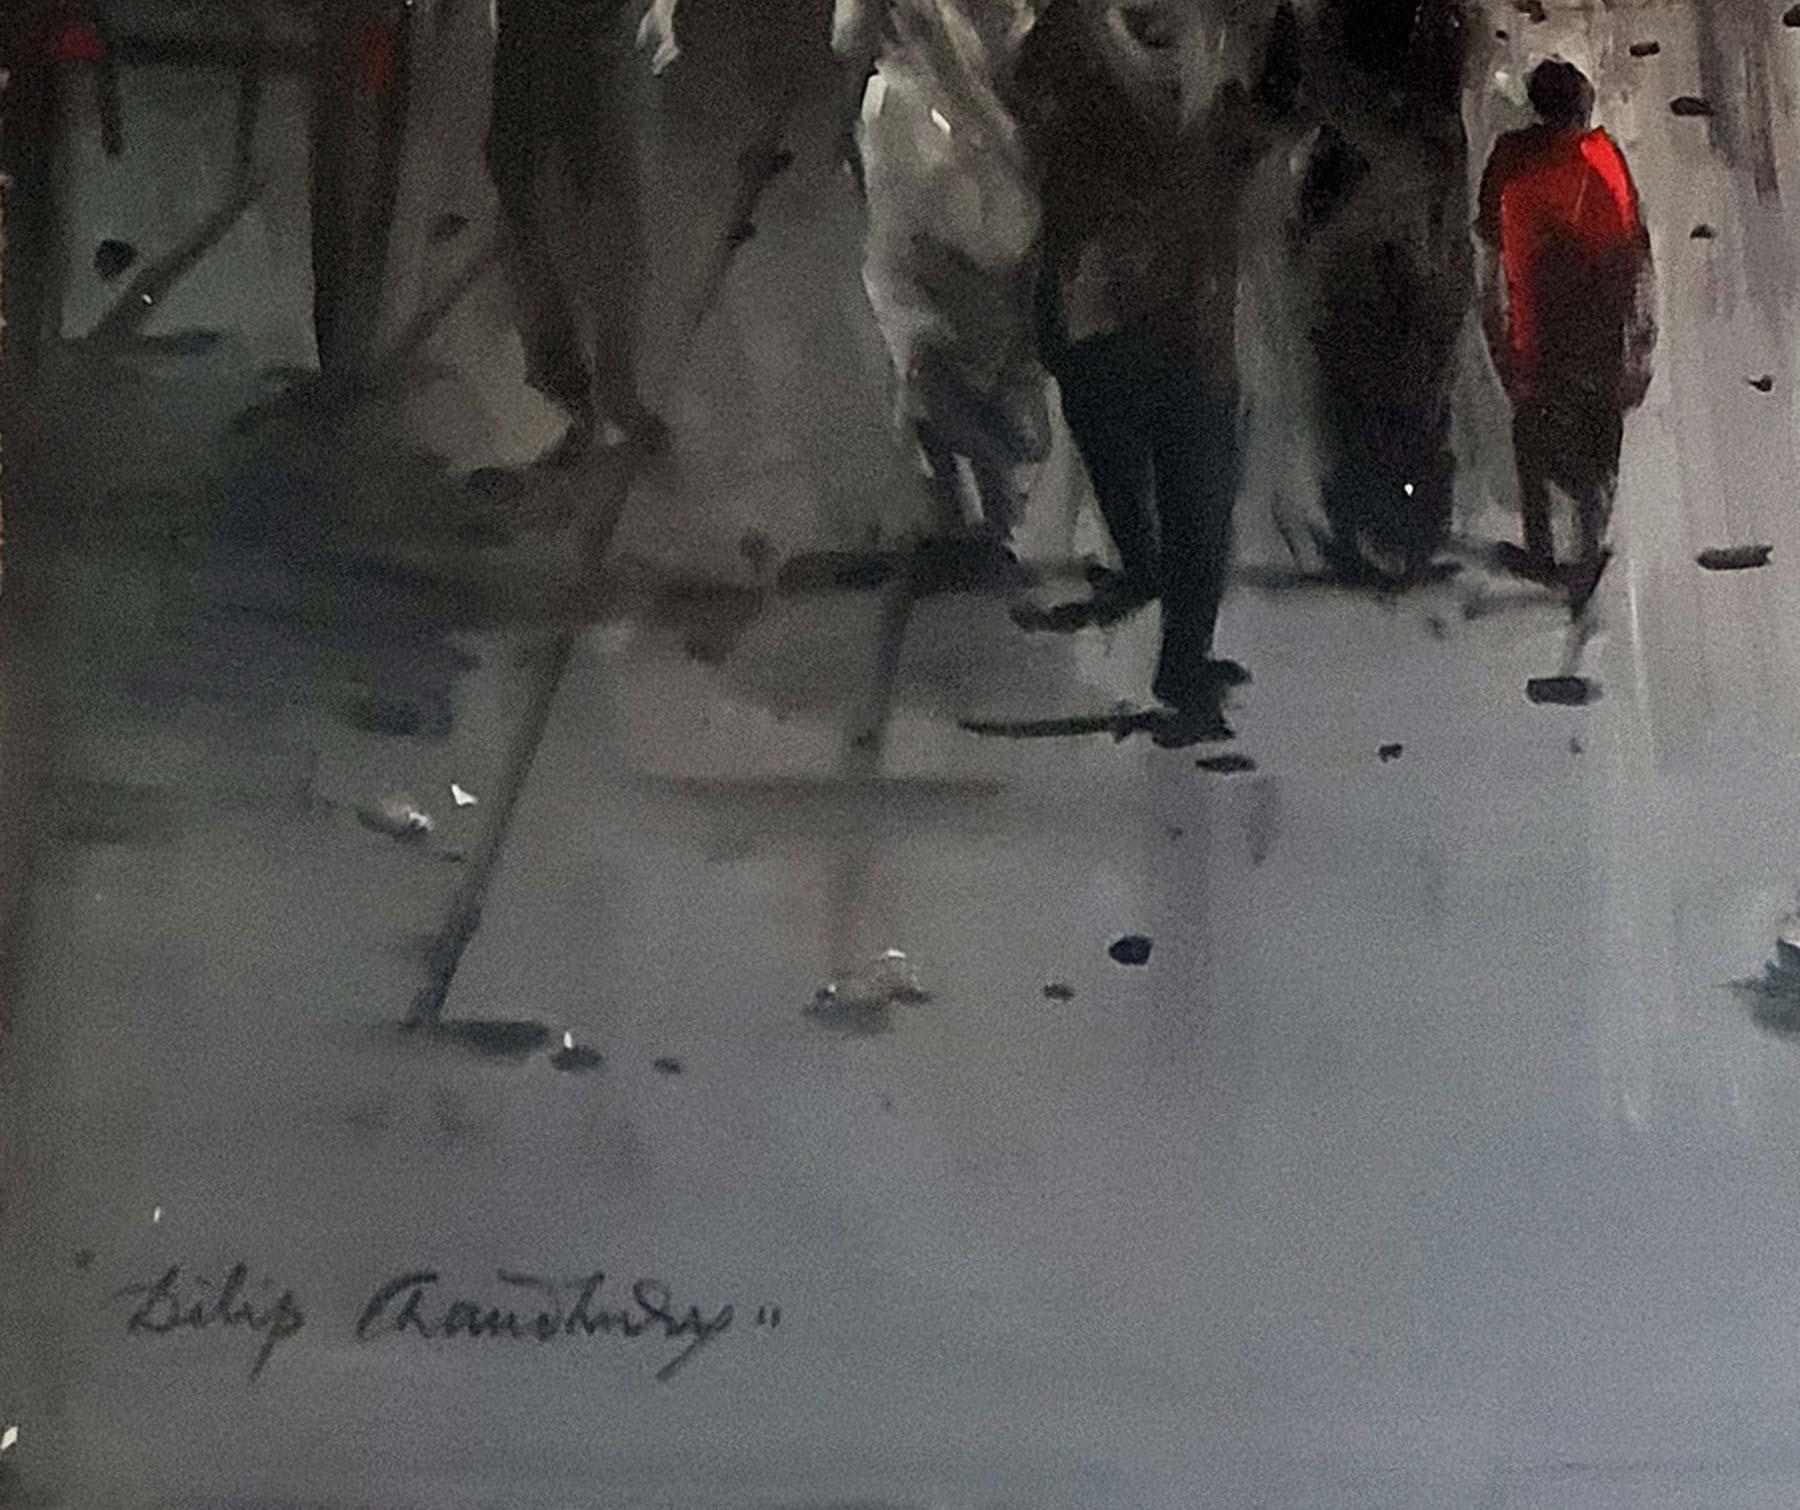 Dilip Chaudhury - Kolkata Street - 40 x 36 inches (unframed size)
Acrylic & Oil on canvas

Style : Dilip Chaudhury's works depict the Bengali countryside and his hometown Kolkata bathed in the monsoon rains. His black and white works are ever